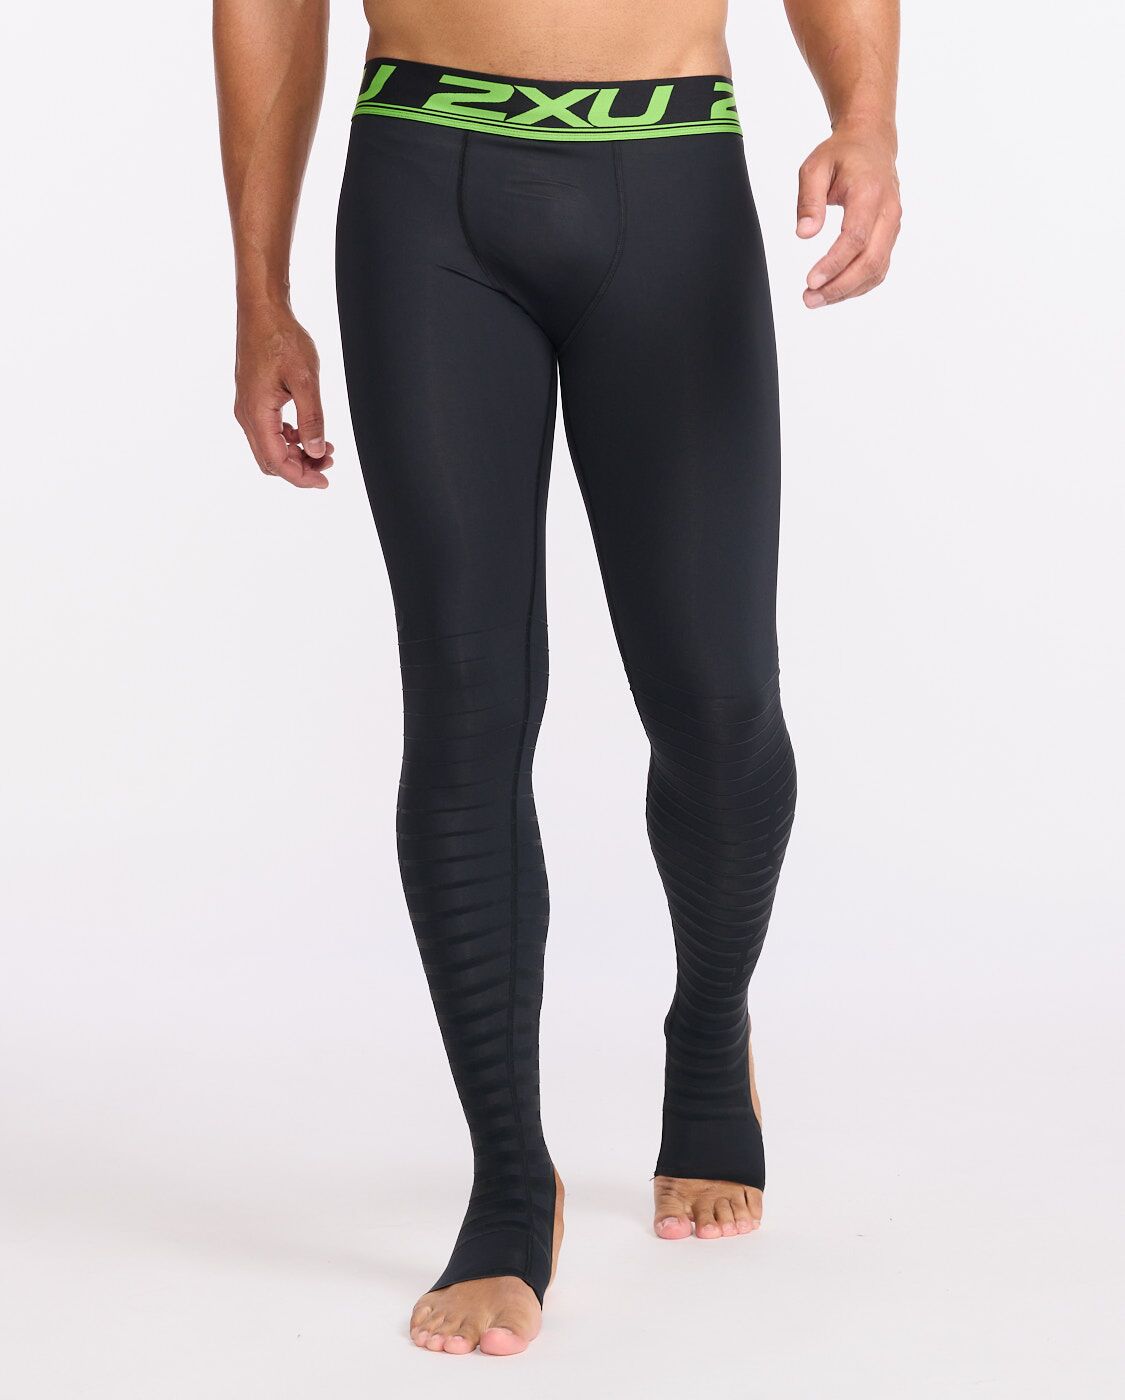 laser Fremmed myndighed Power Recovery compression Tights – 2XU US